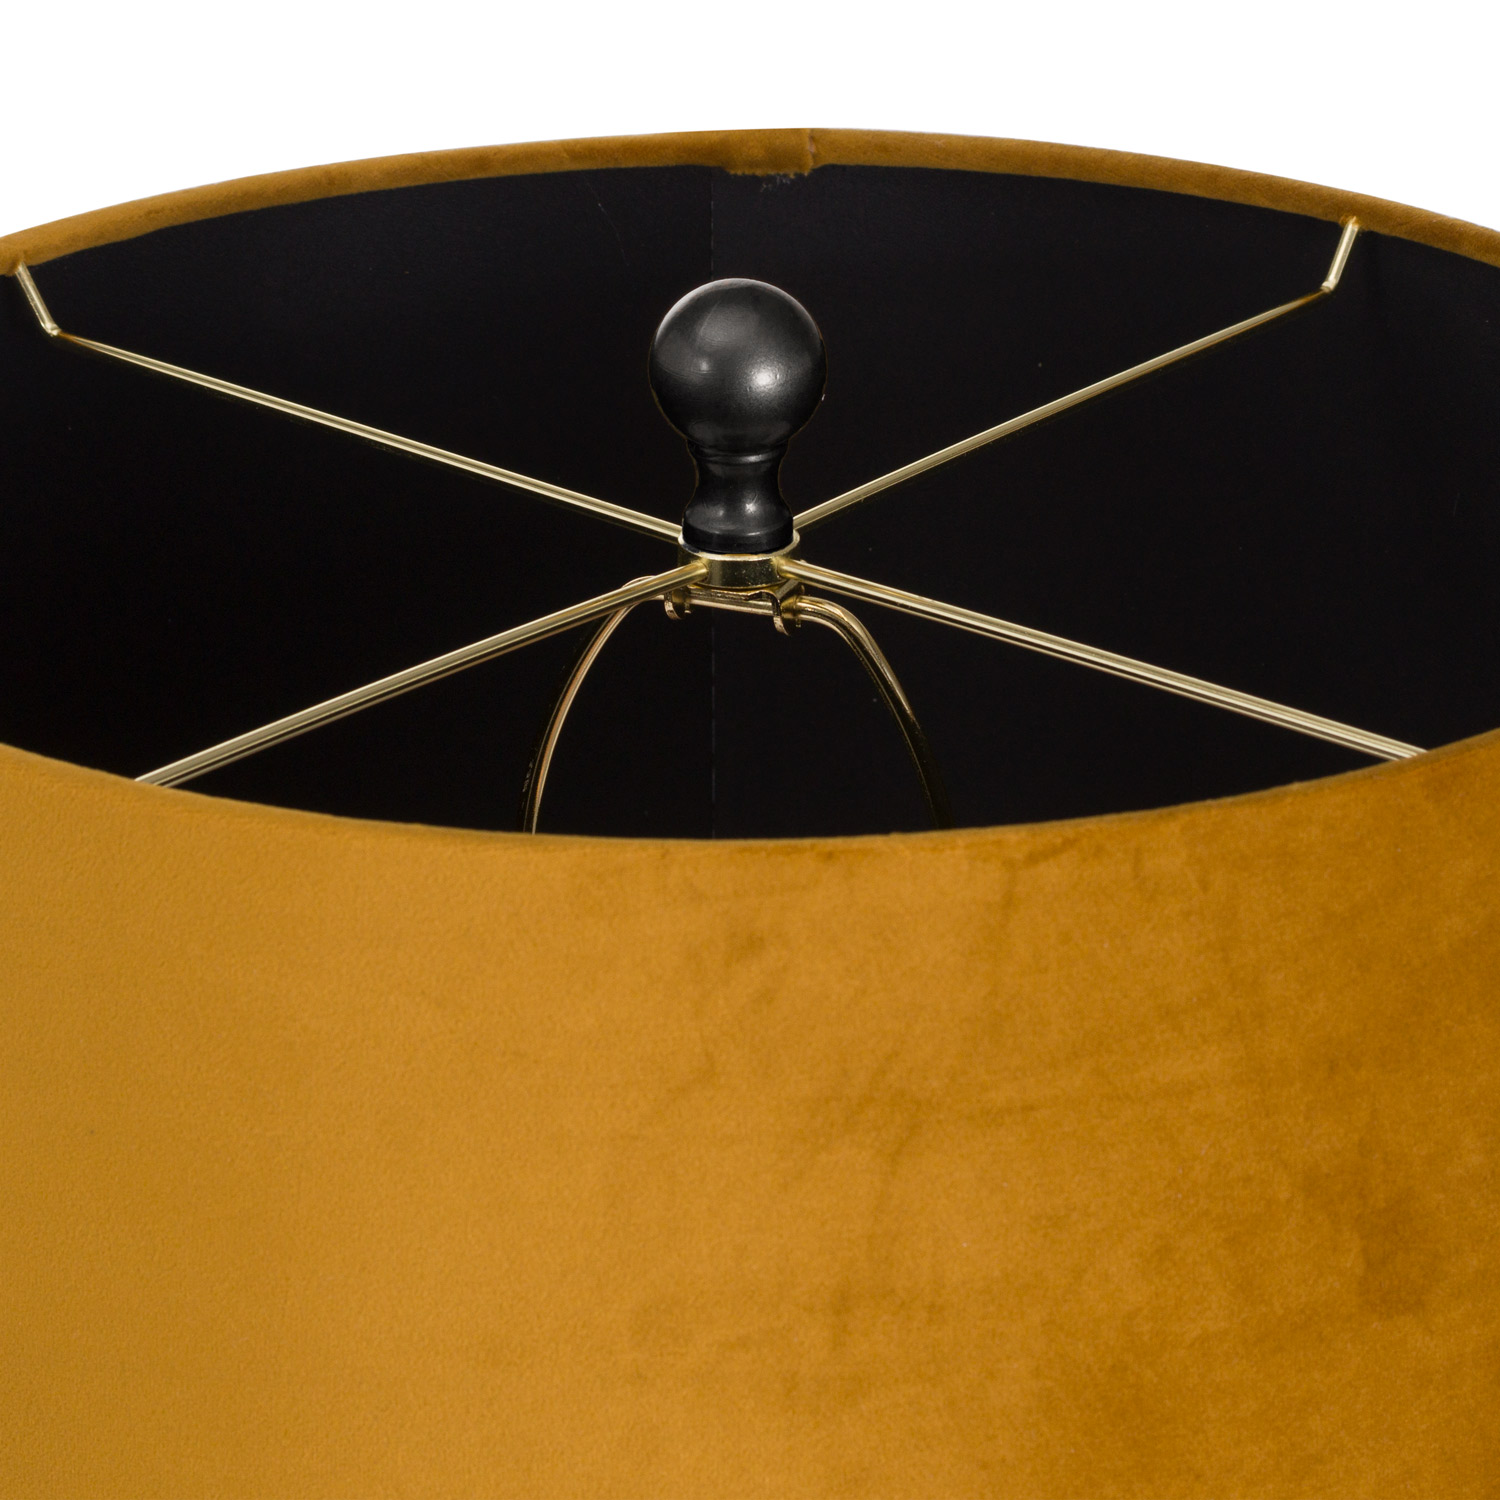 Harlow Bee Table Lamp With Mustard Shade - Image 3